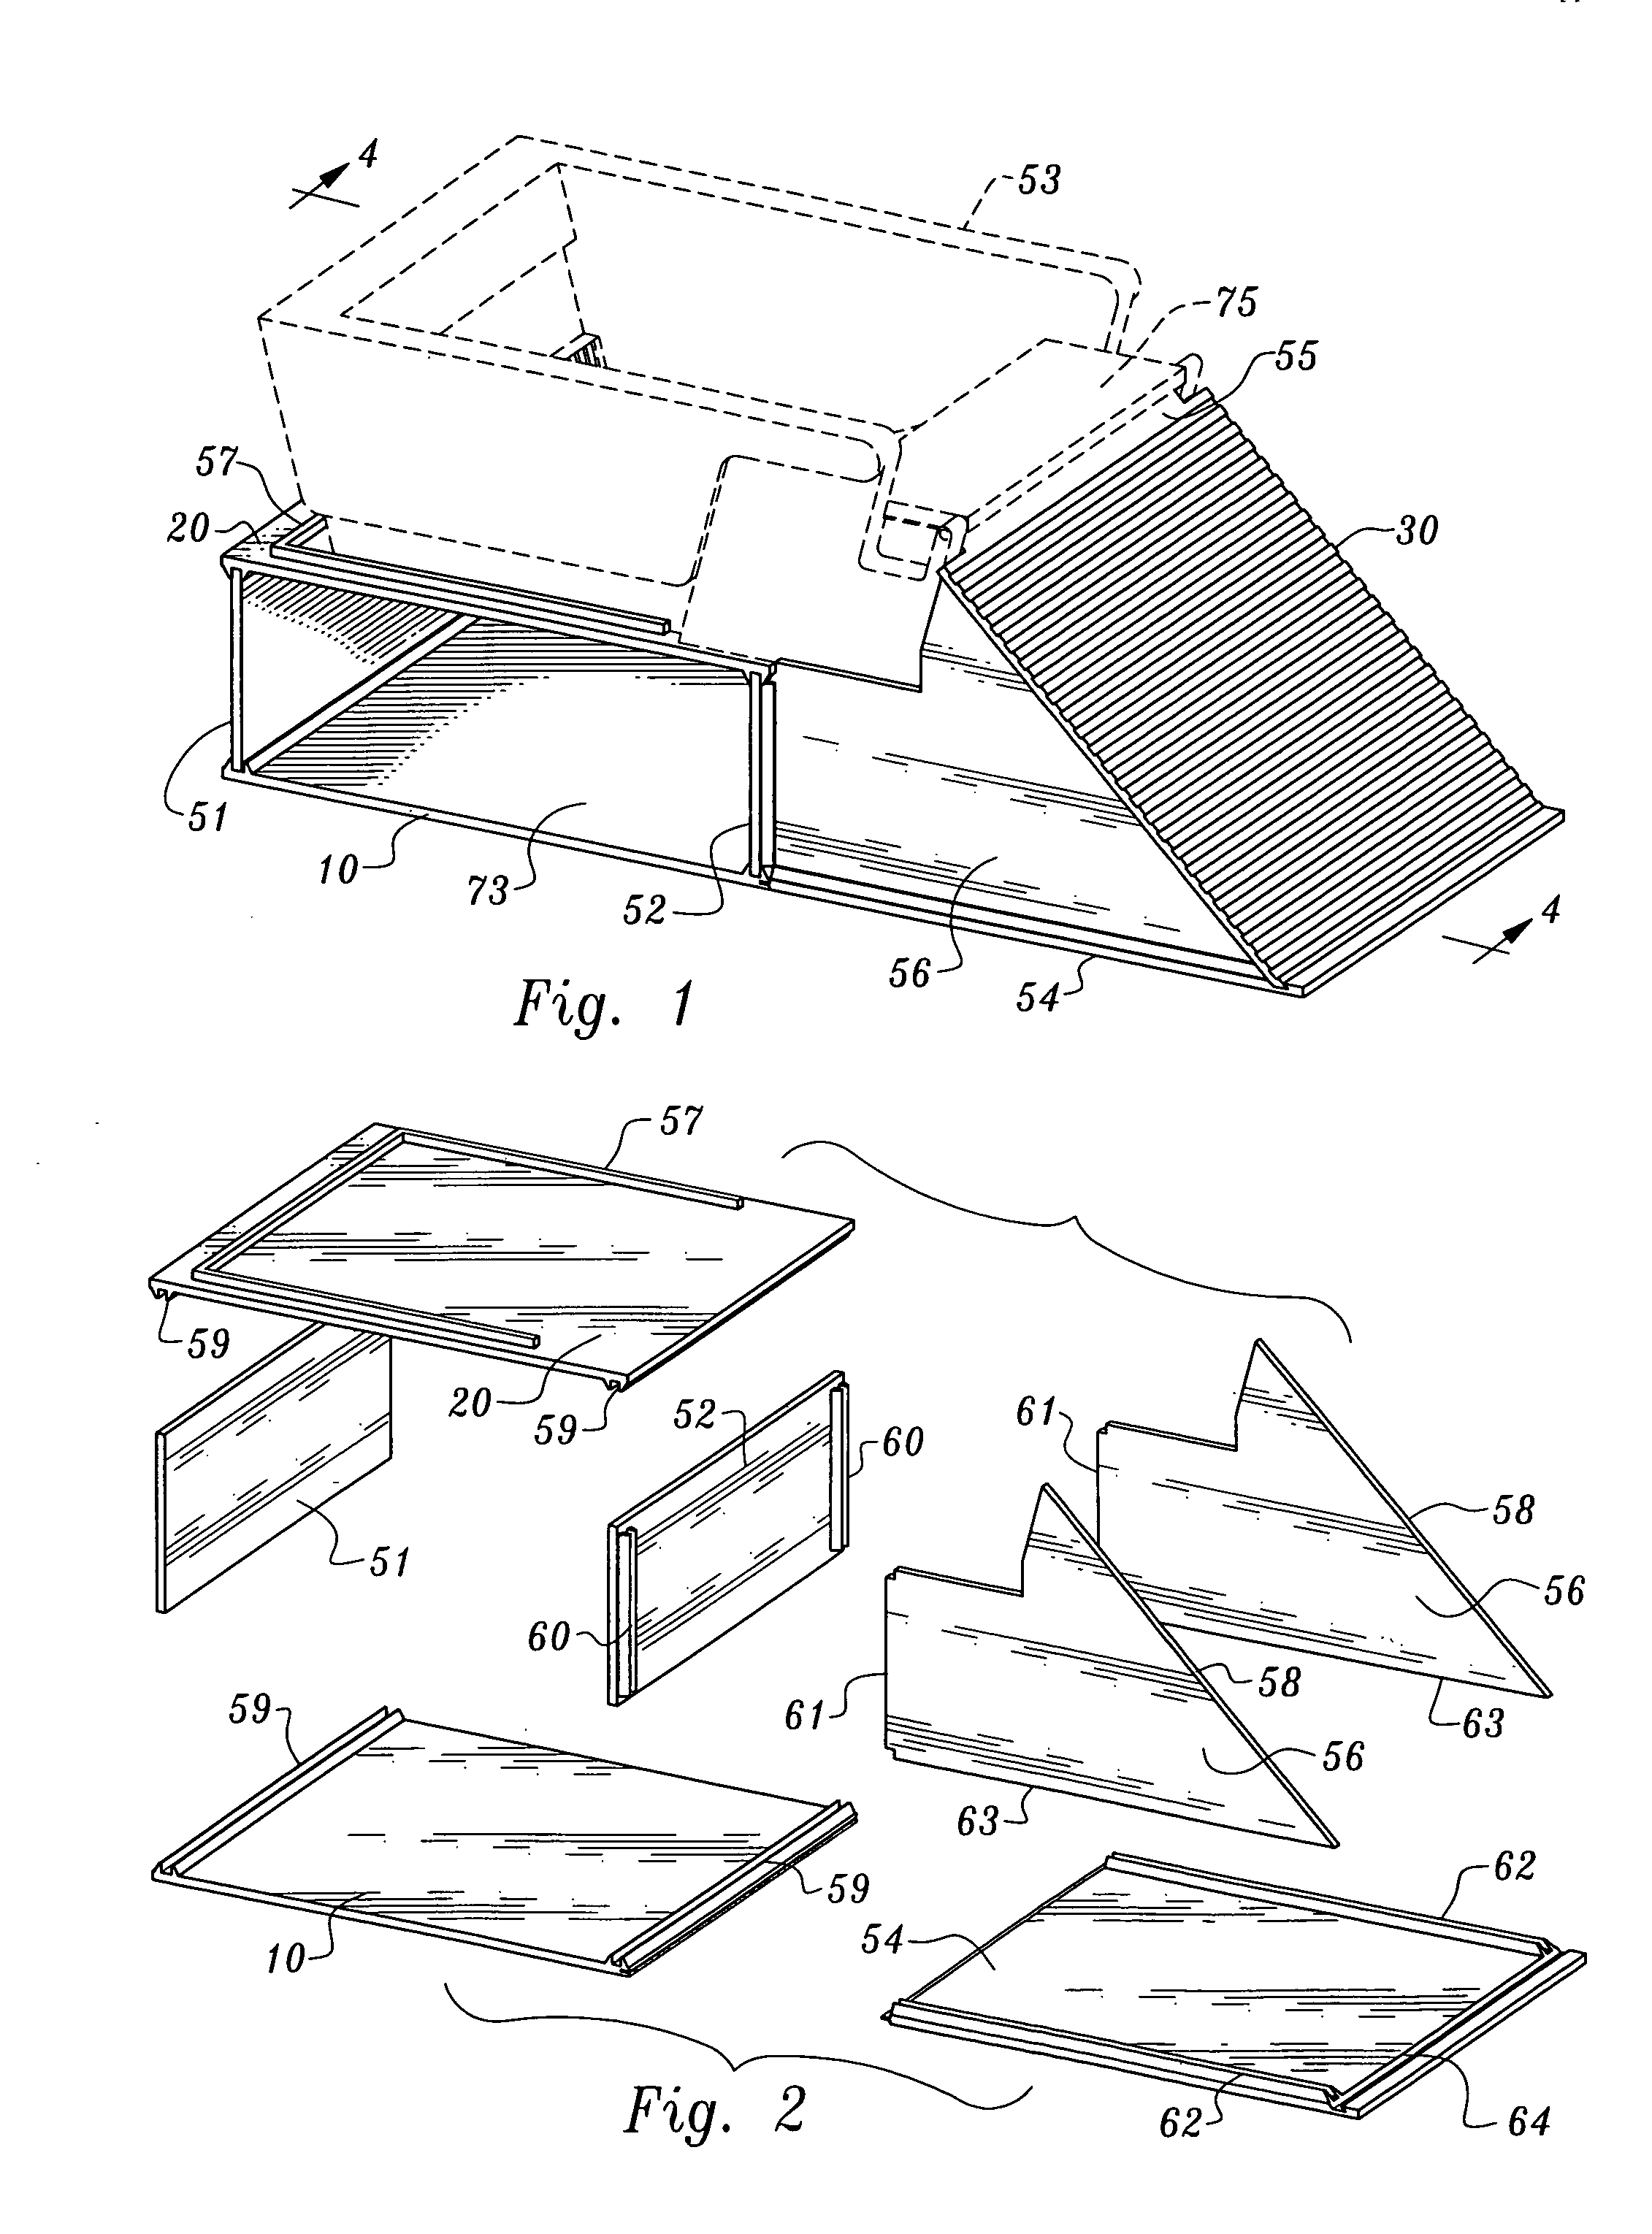 Apparatus and method for increasing capacity of automated litter box